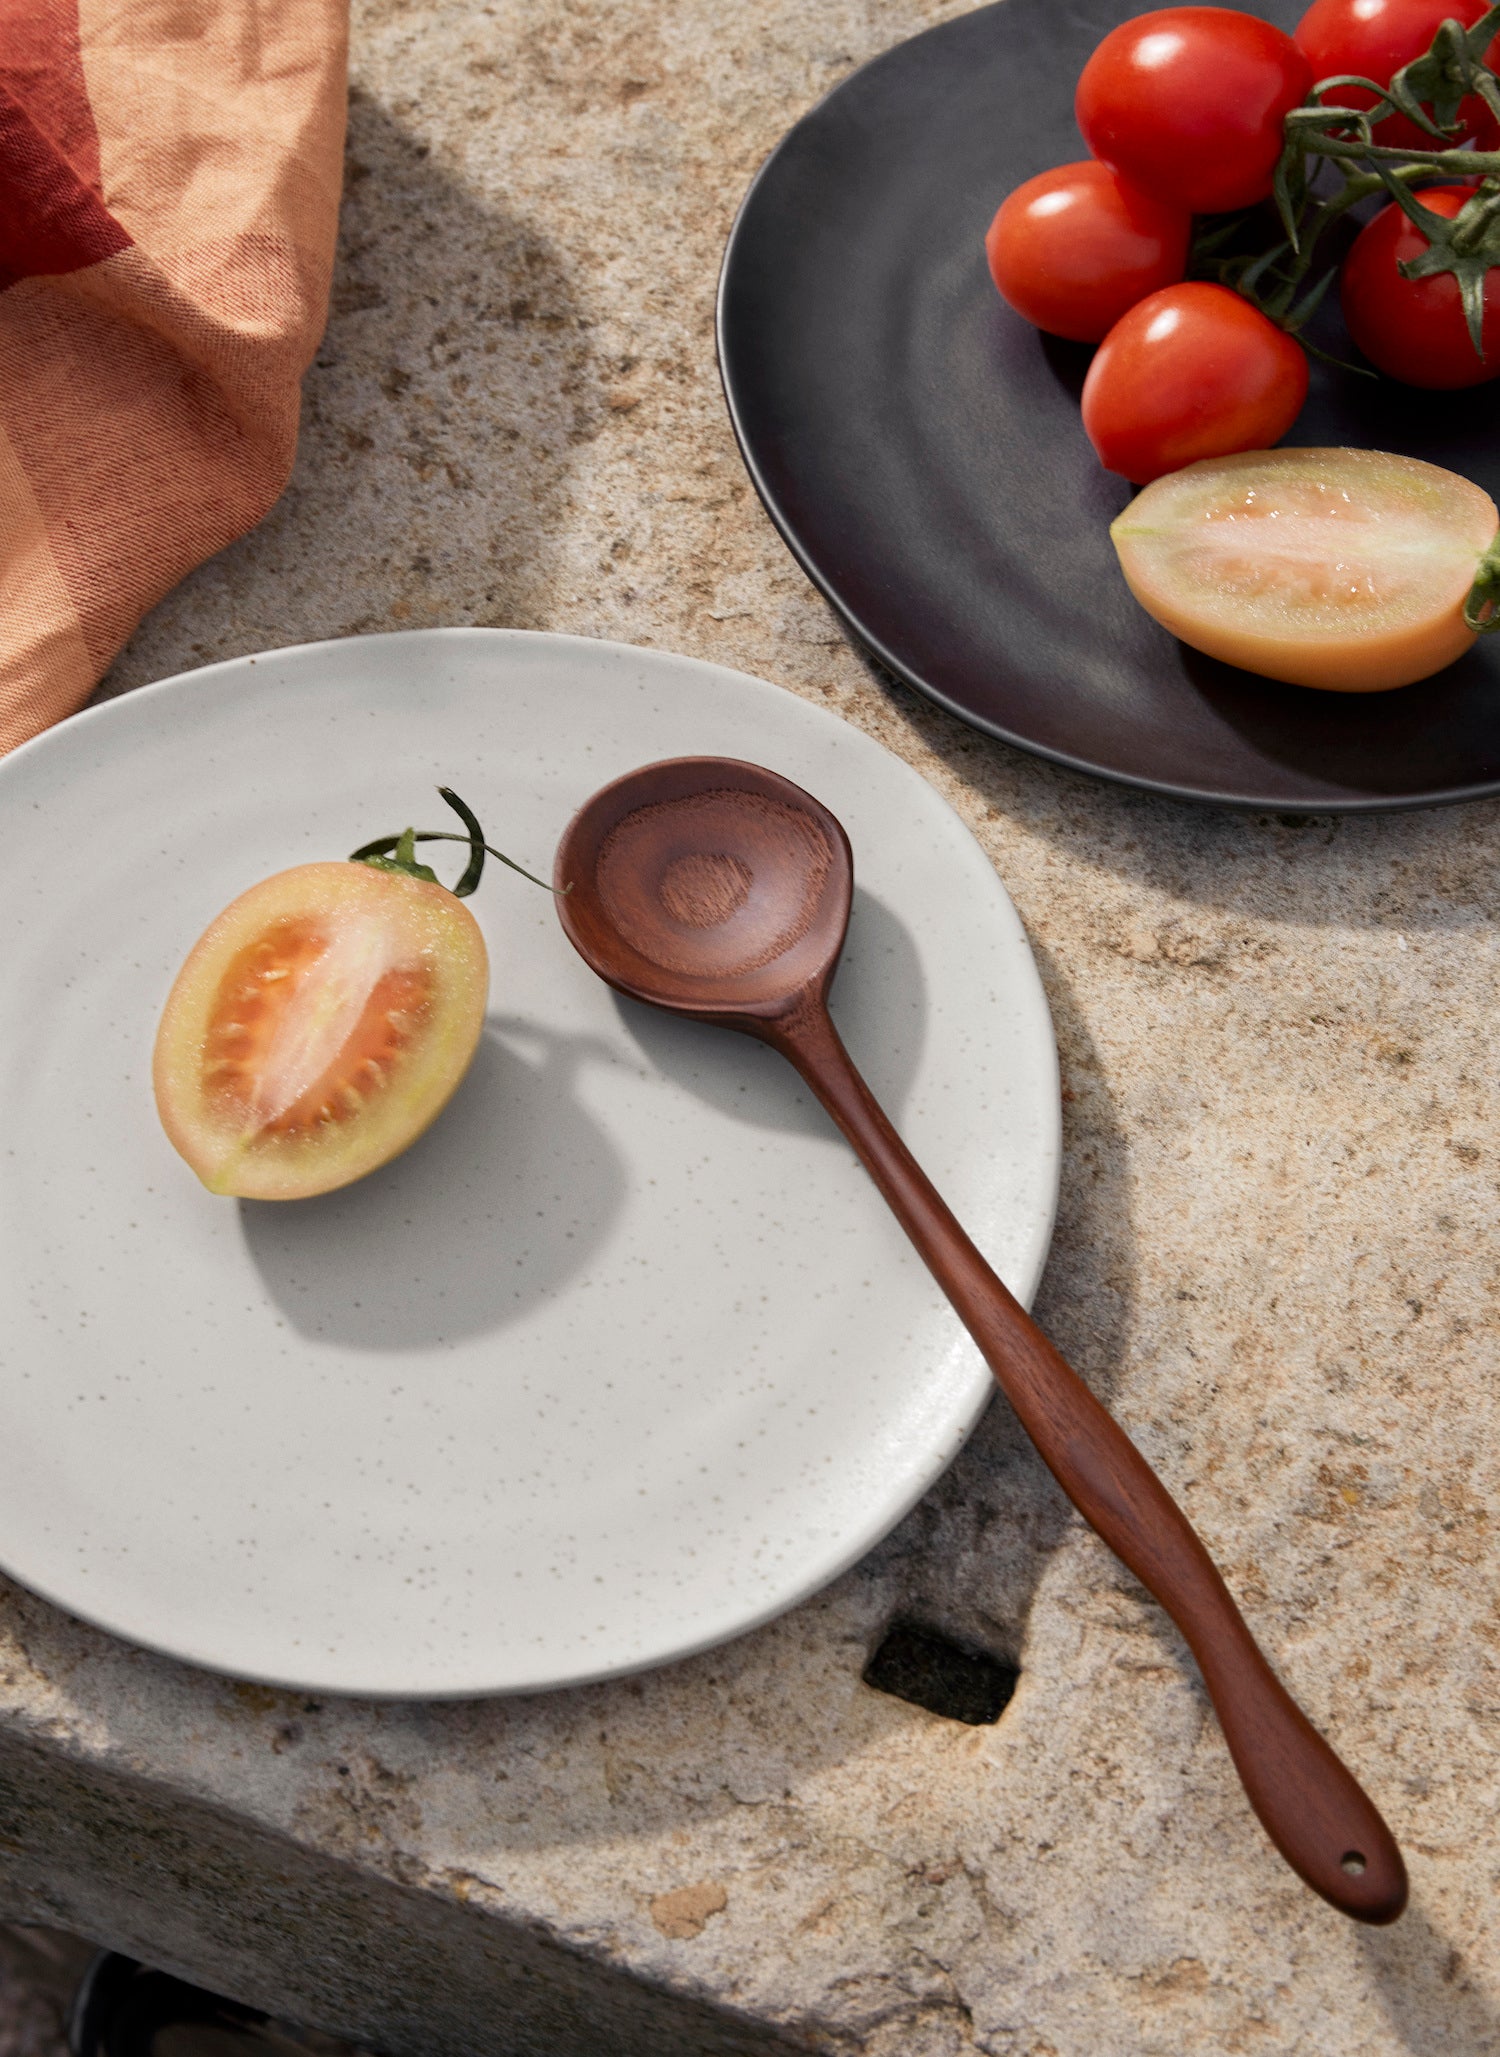 A perfectly imperfect plate made to modern sensibilities using traditional craftsmanship techniques in a matte off white speckle finish.